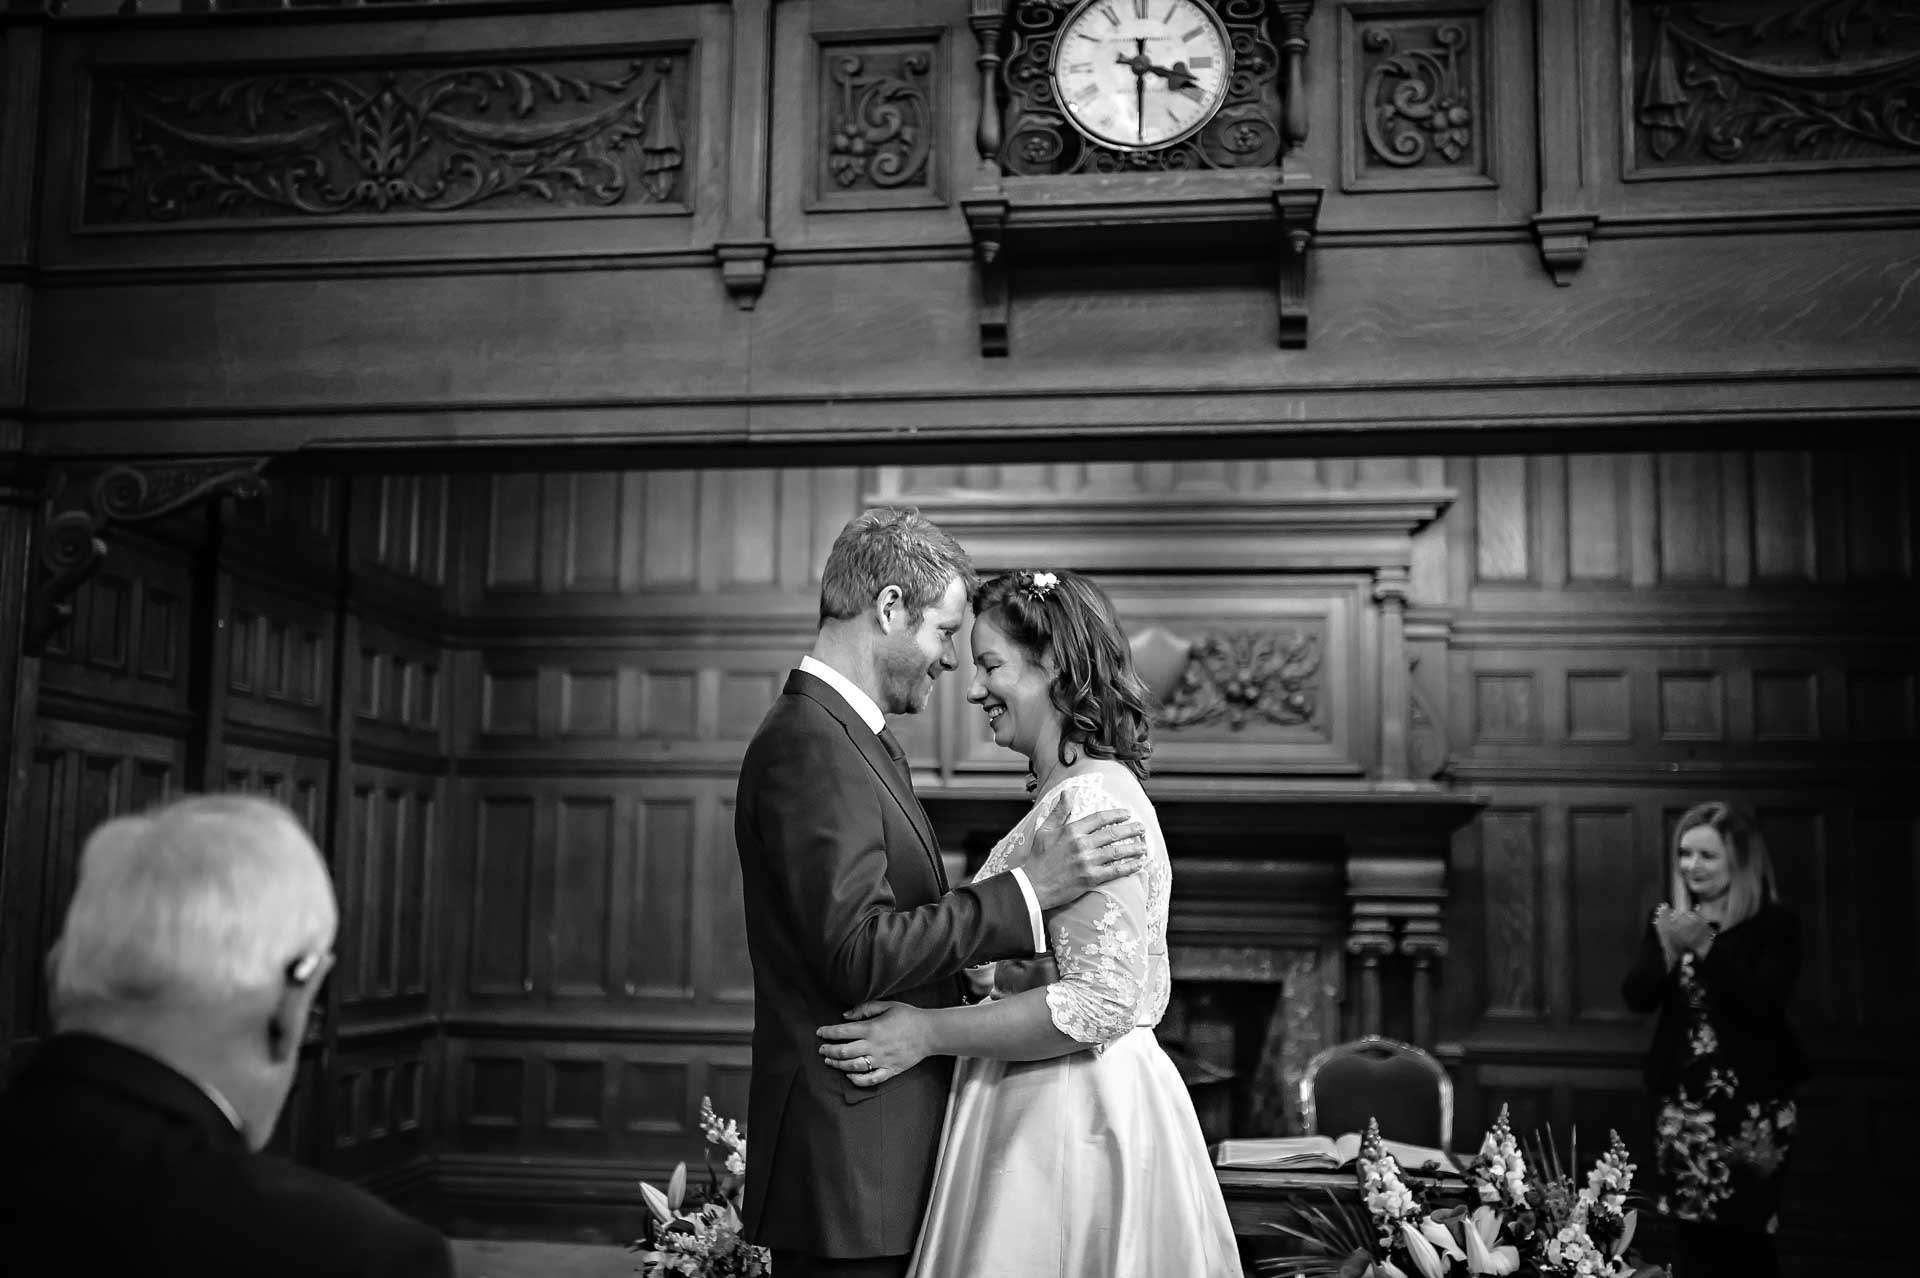 Groom Holding Bride During Wedding Ceremony at Chiswick Town Hall